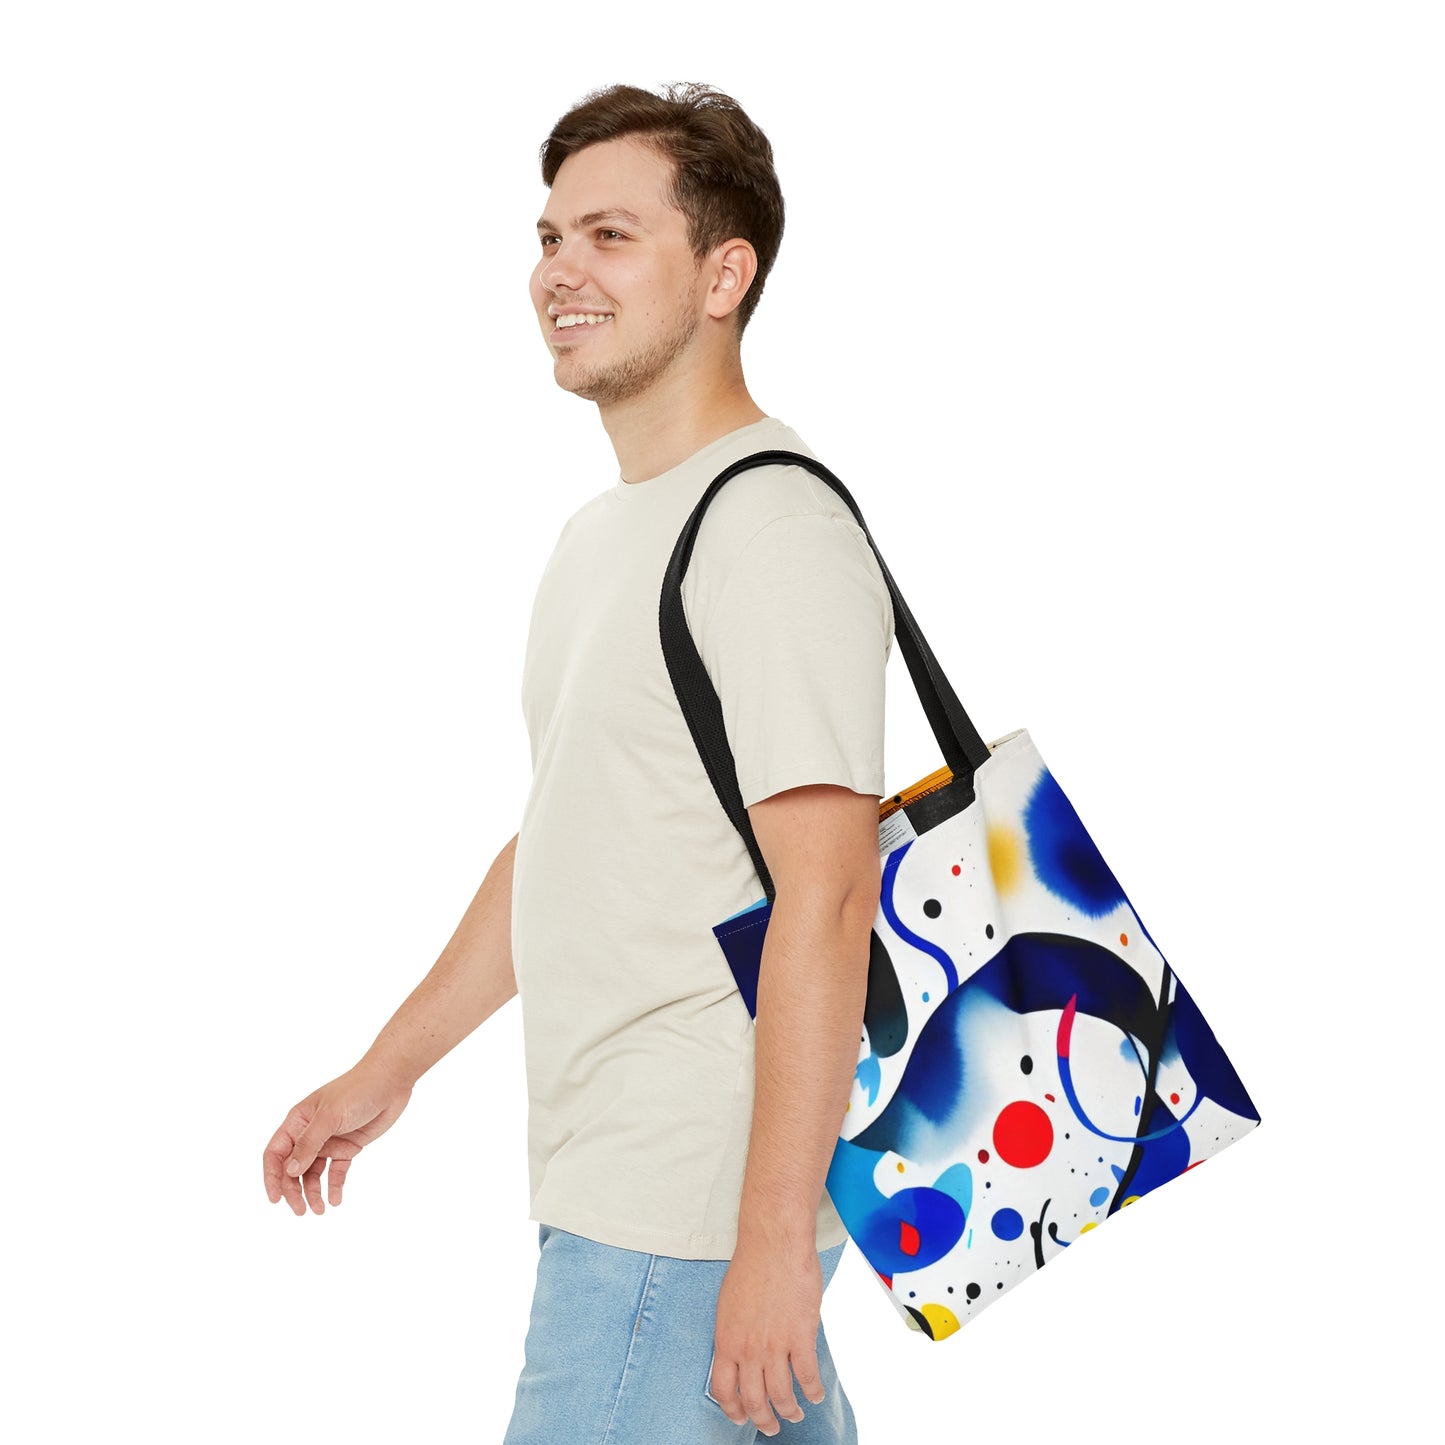 Tote Bag, Inspired by Miro